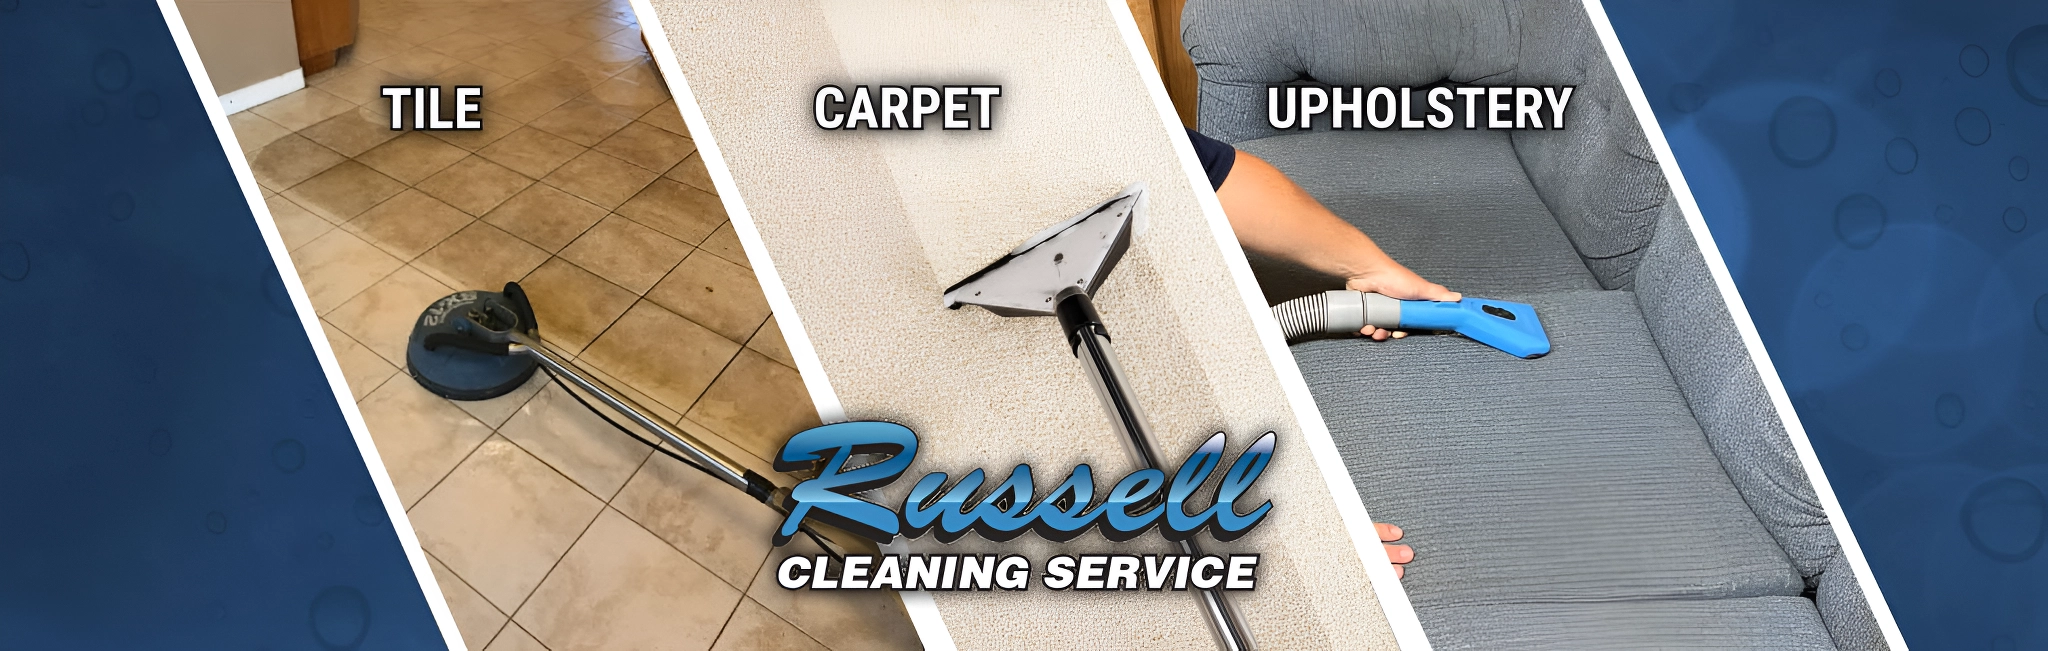 Russell Cleaning does it all, Tile, Carpet and Upholstery Cleaning